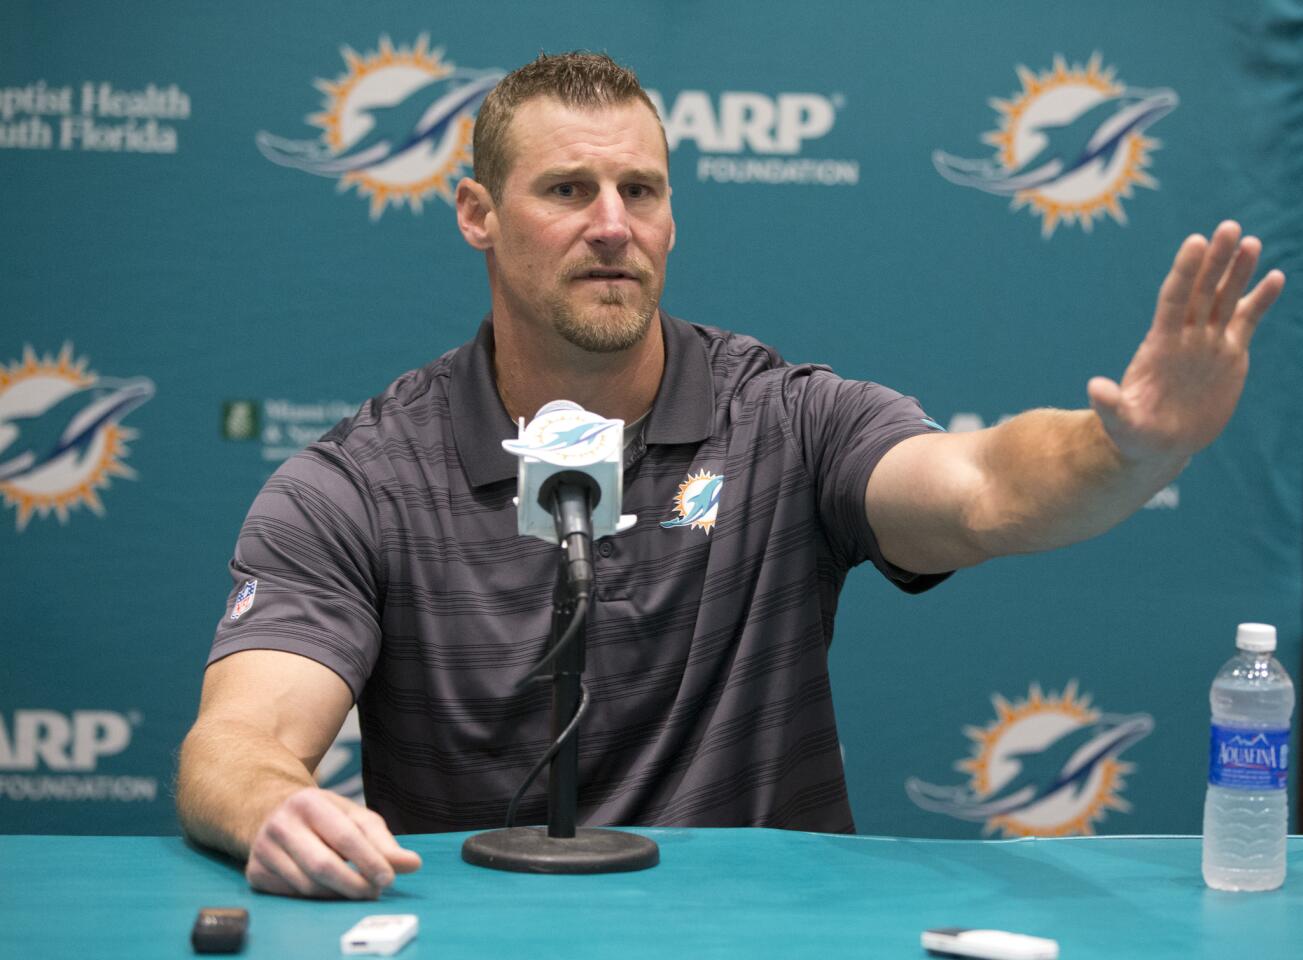 Interim coach Dan Campbell is fighting a culture problem. Good luck sorting that out starting in Week 6.